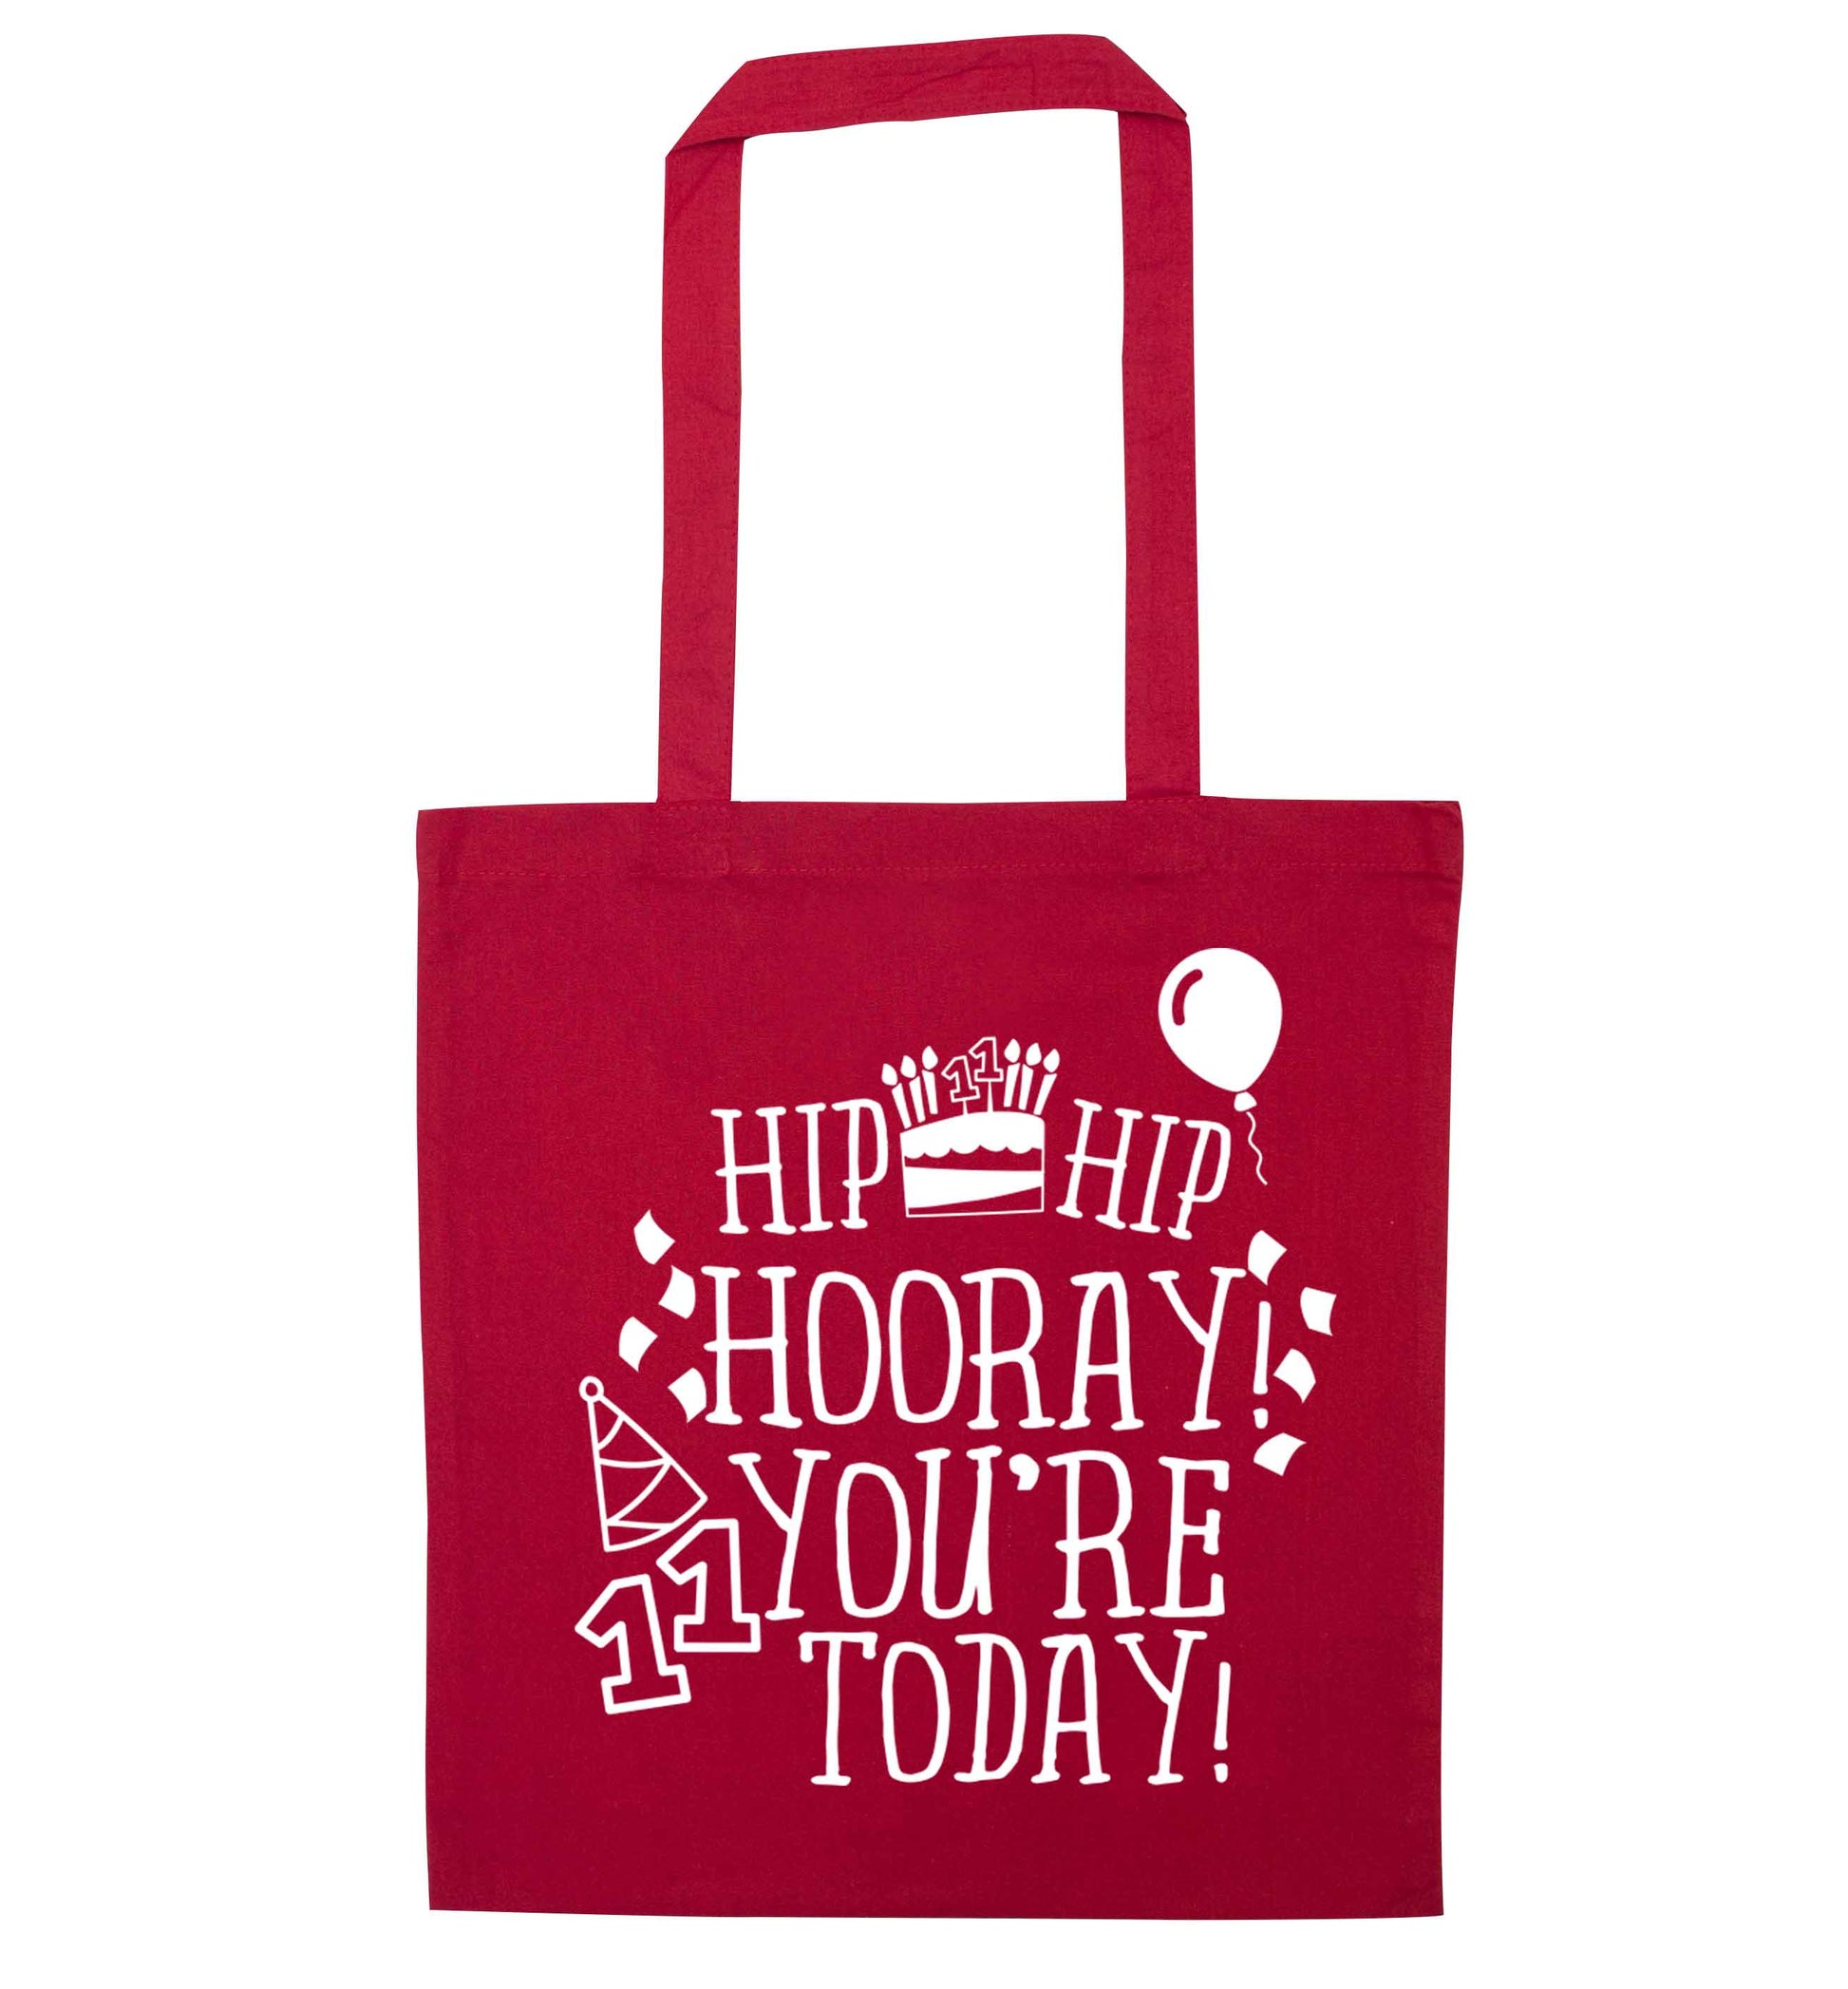 Hip hip hooray I you're eleven today! red tote bag